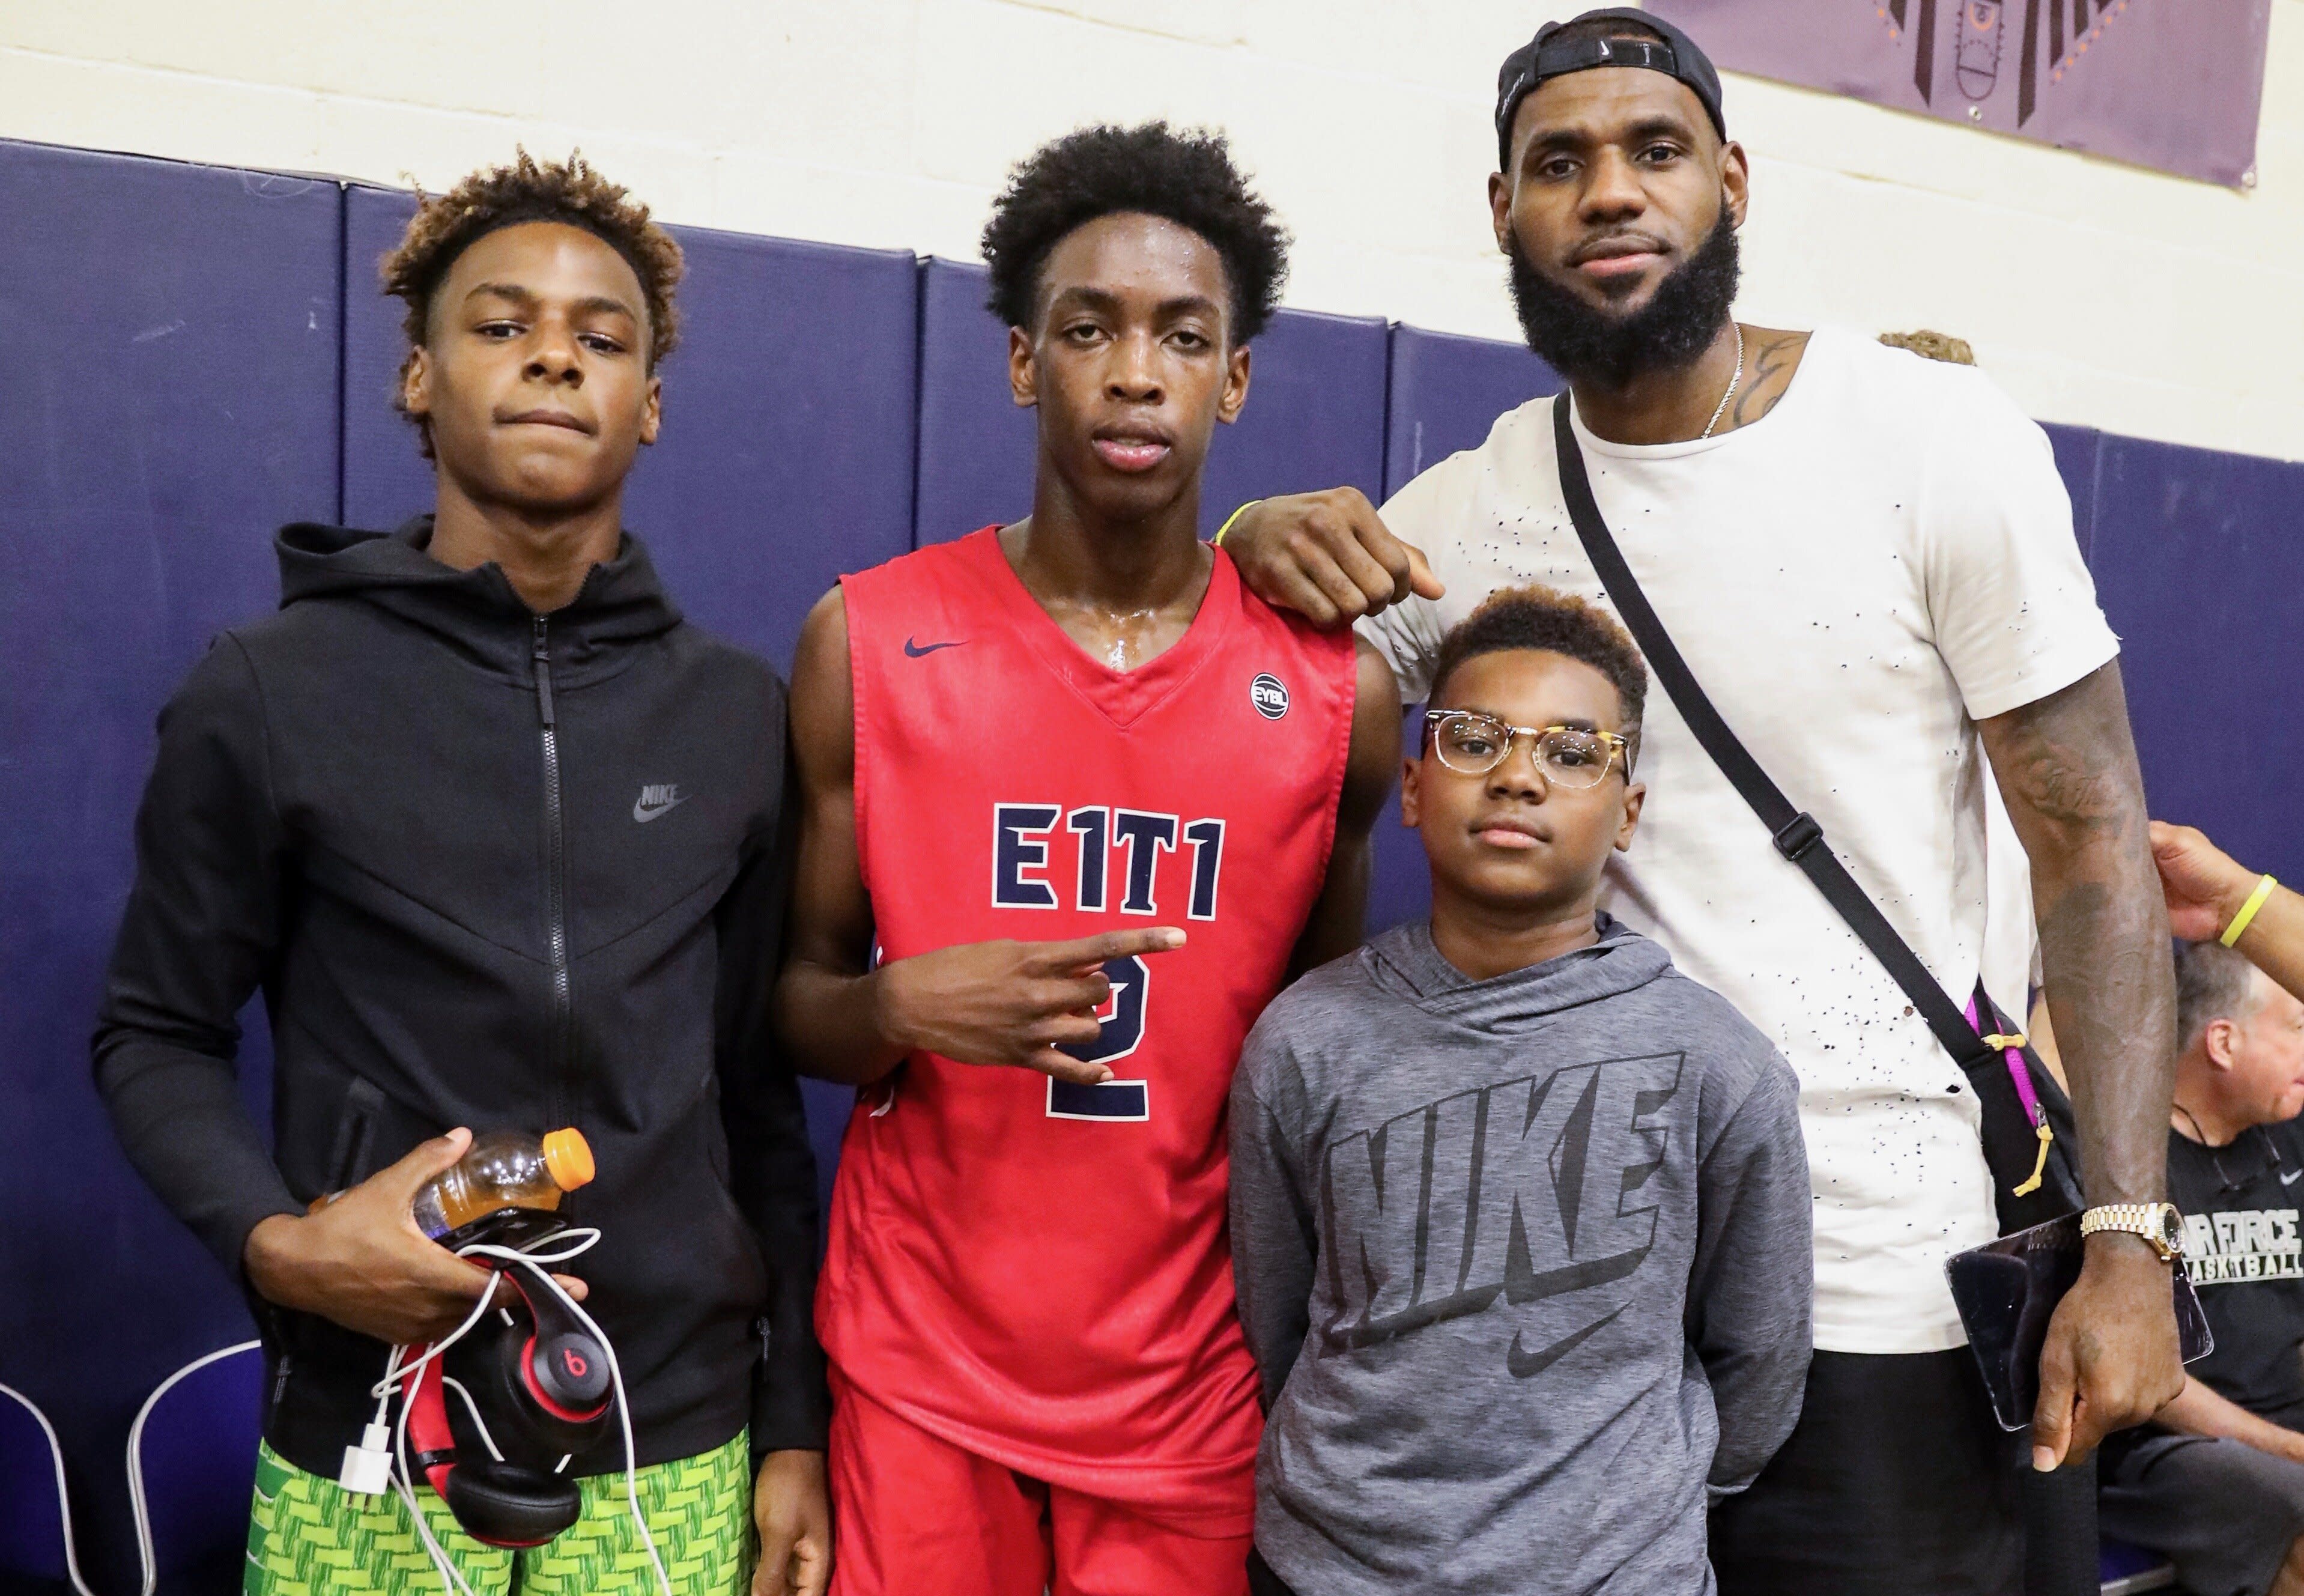 zaire and bronny